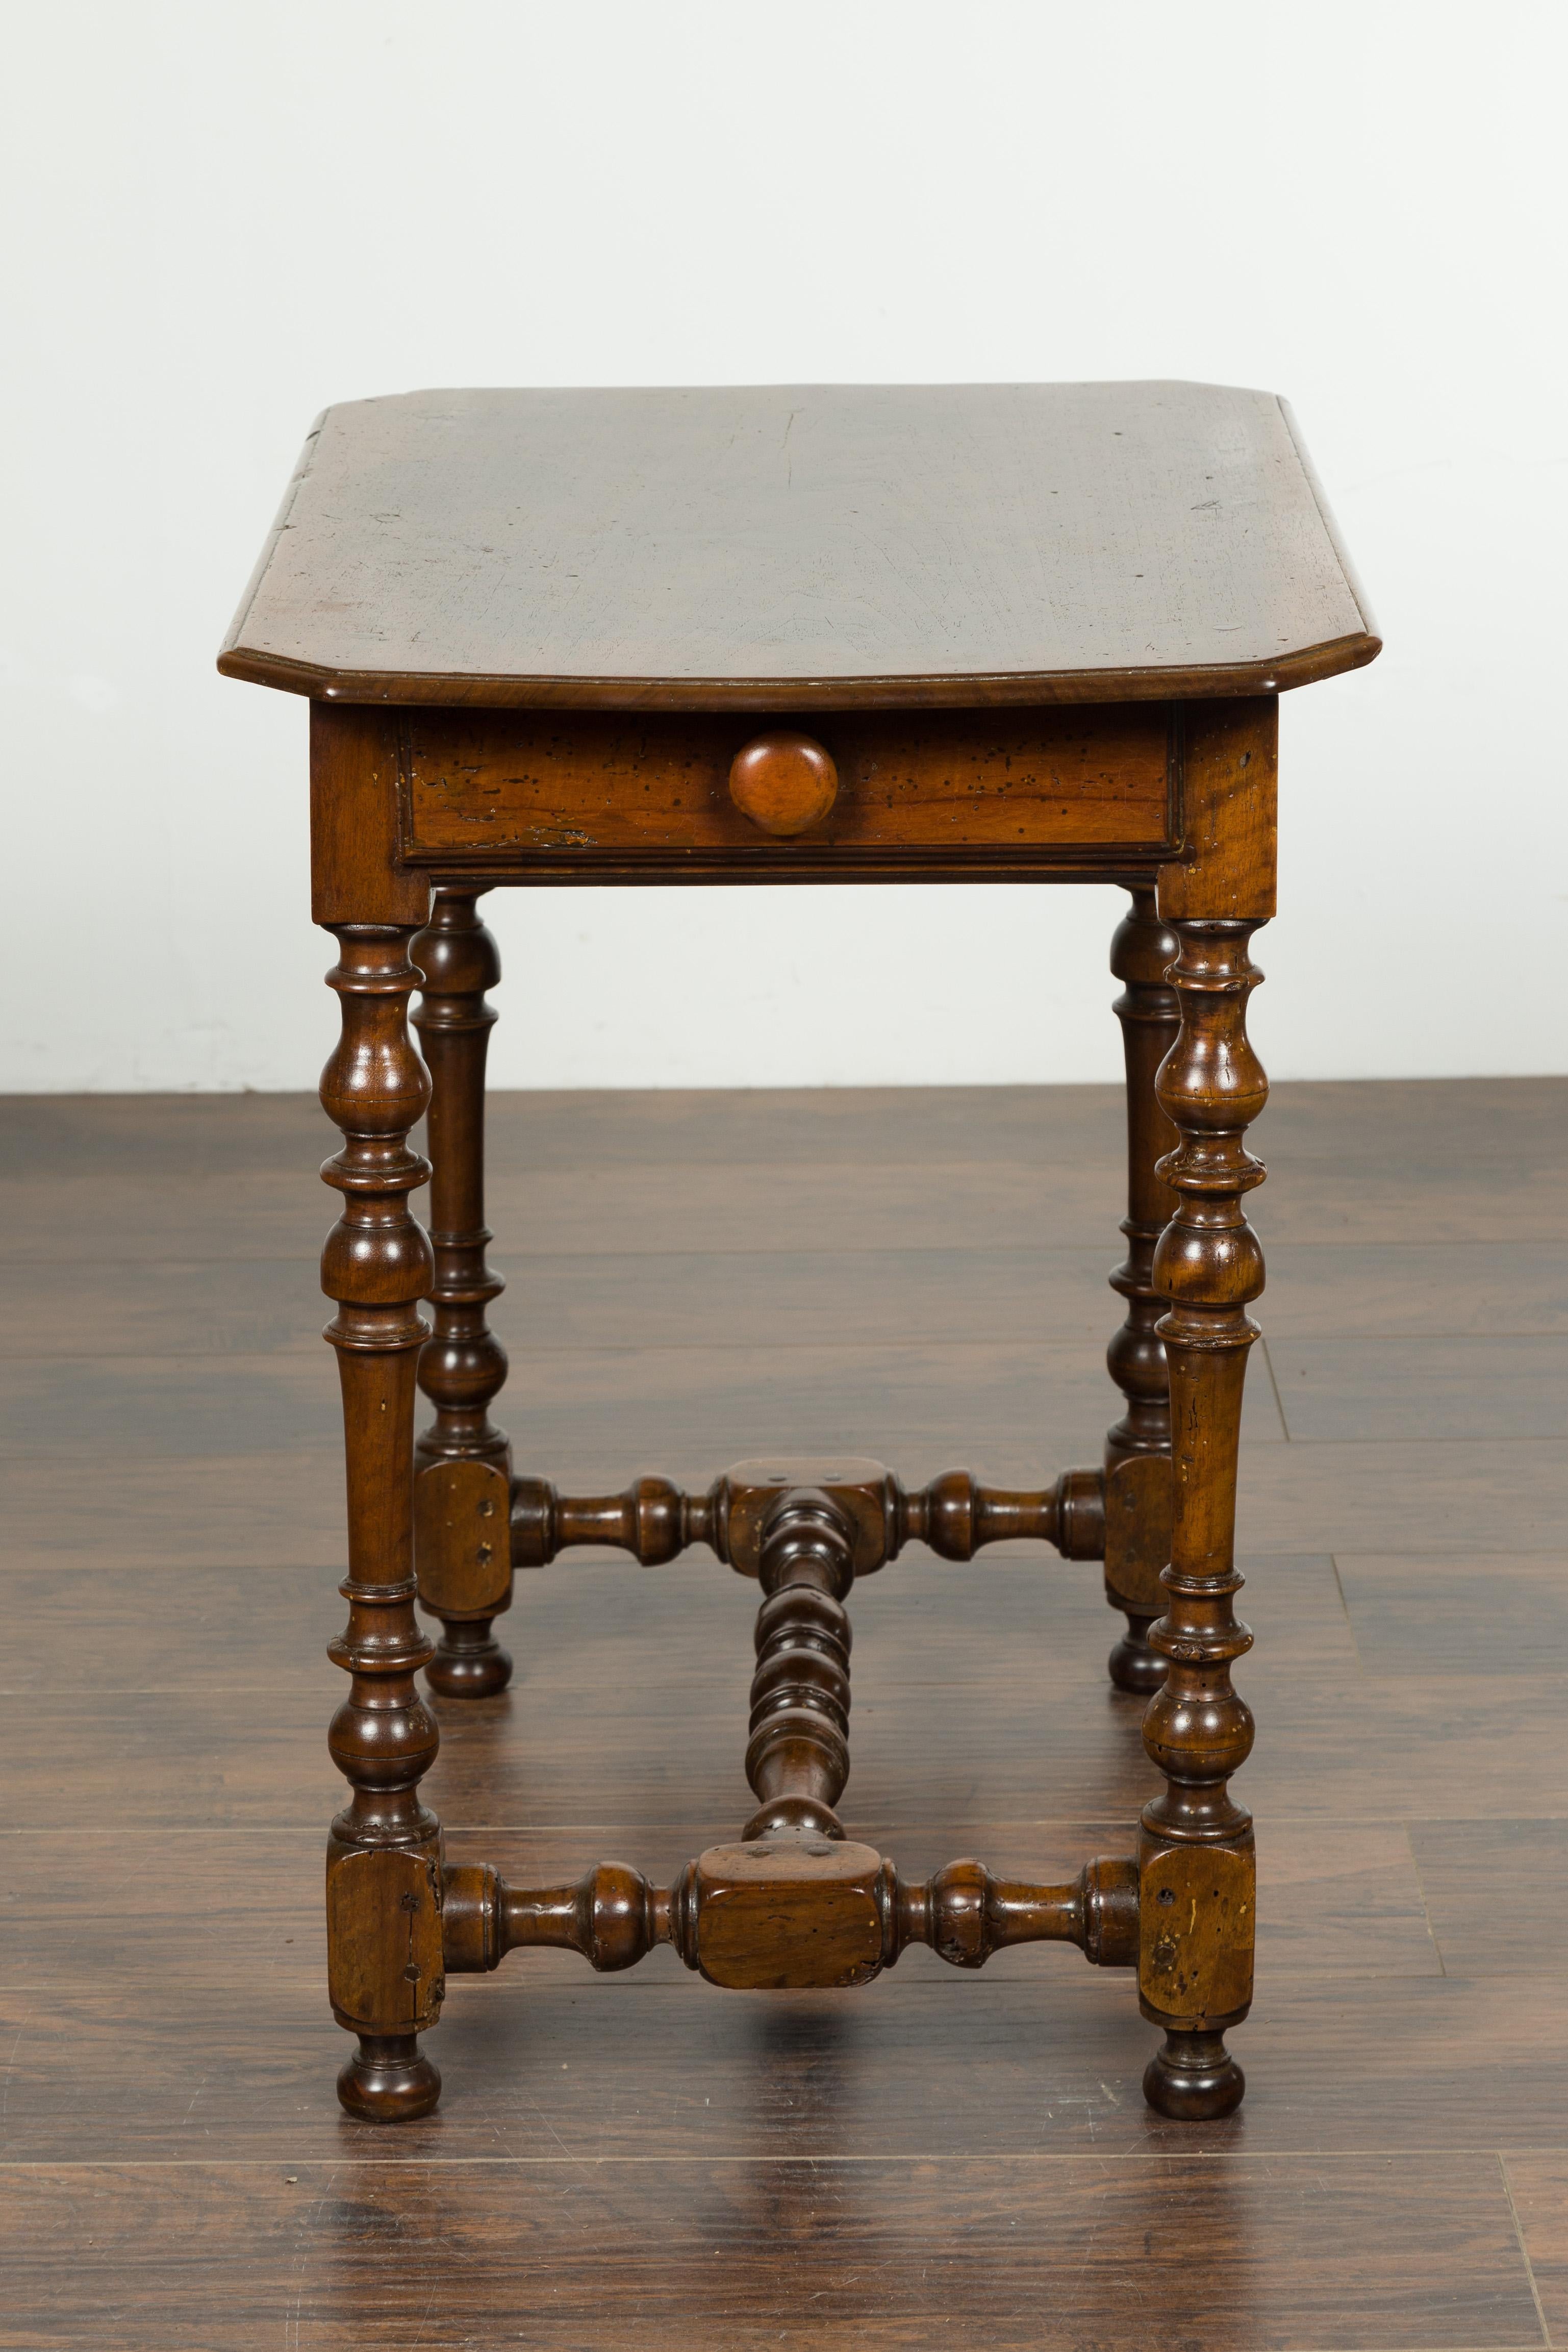 19th Century English 1810s George III Walnut Side Table with Single Drawer and Turned Legs